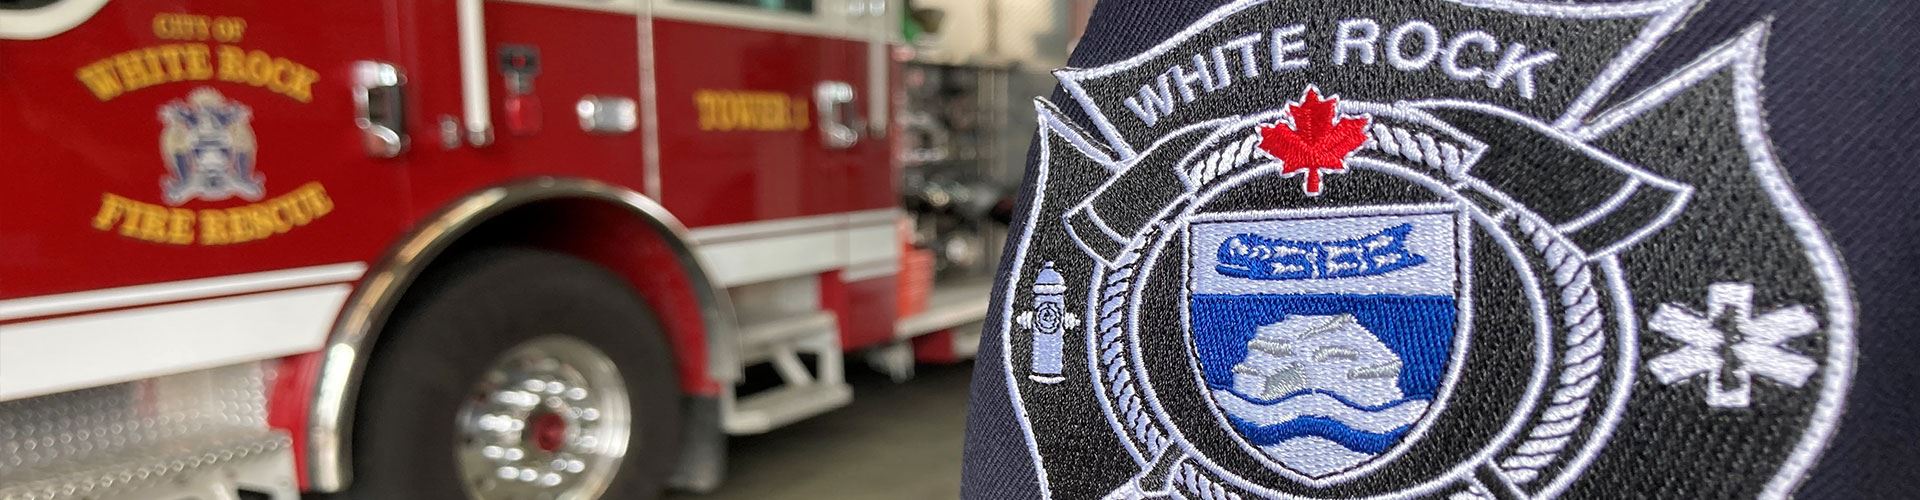 White Rock Fire Rescue department patch